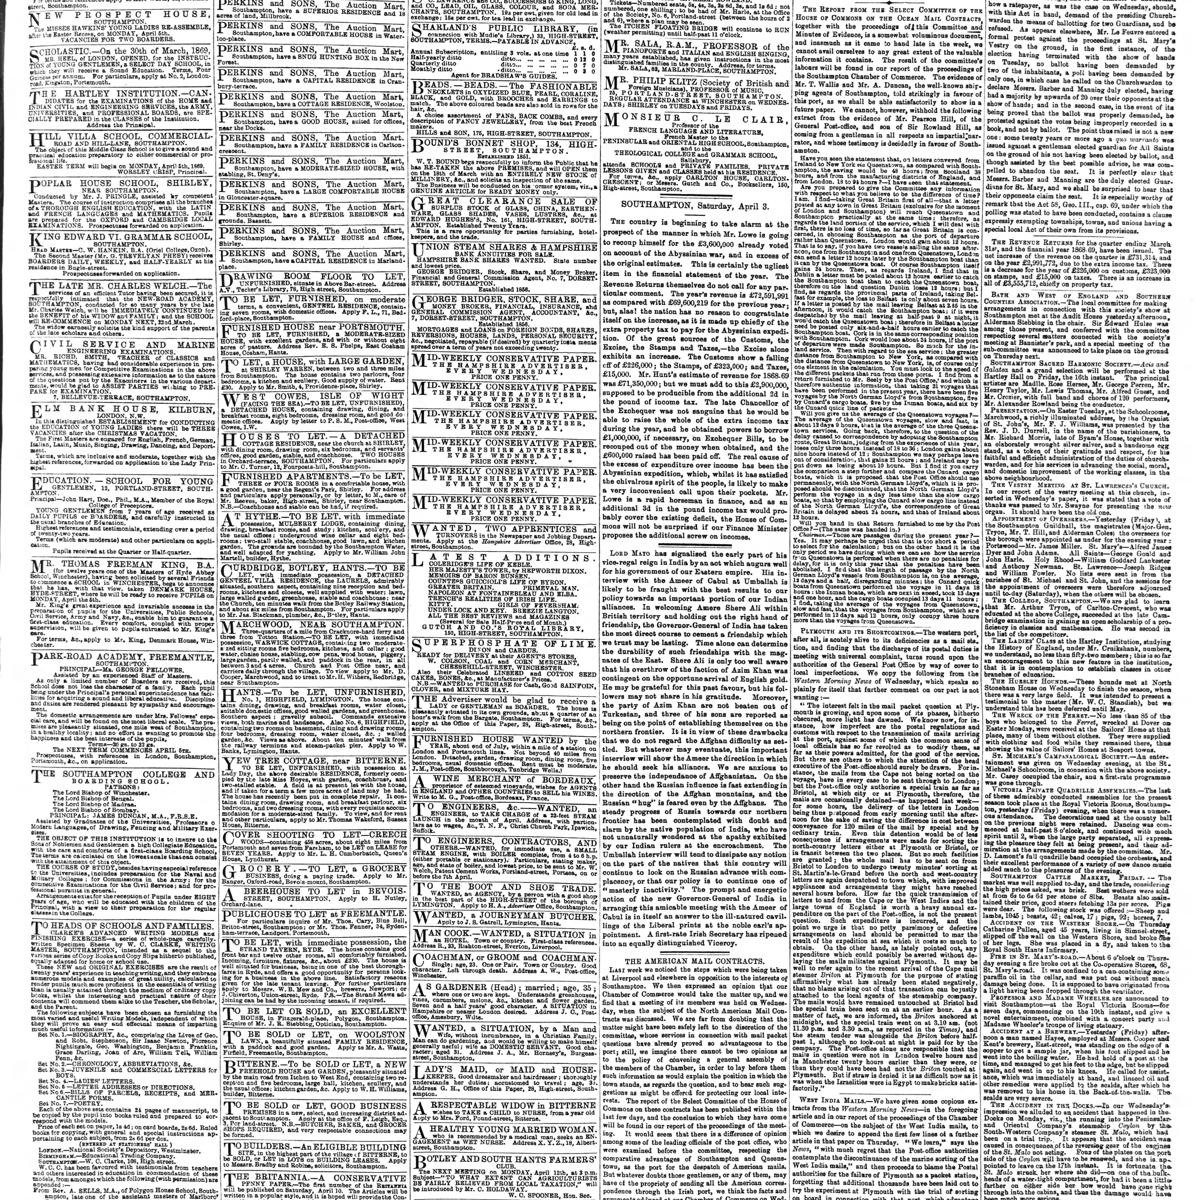 The Hampshire Advertiser, 1869-04-03, page 5